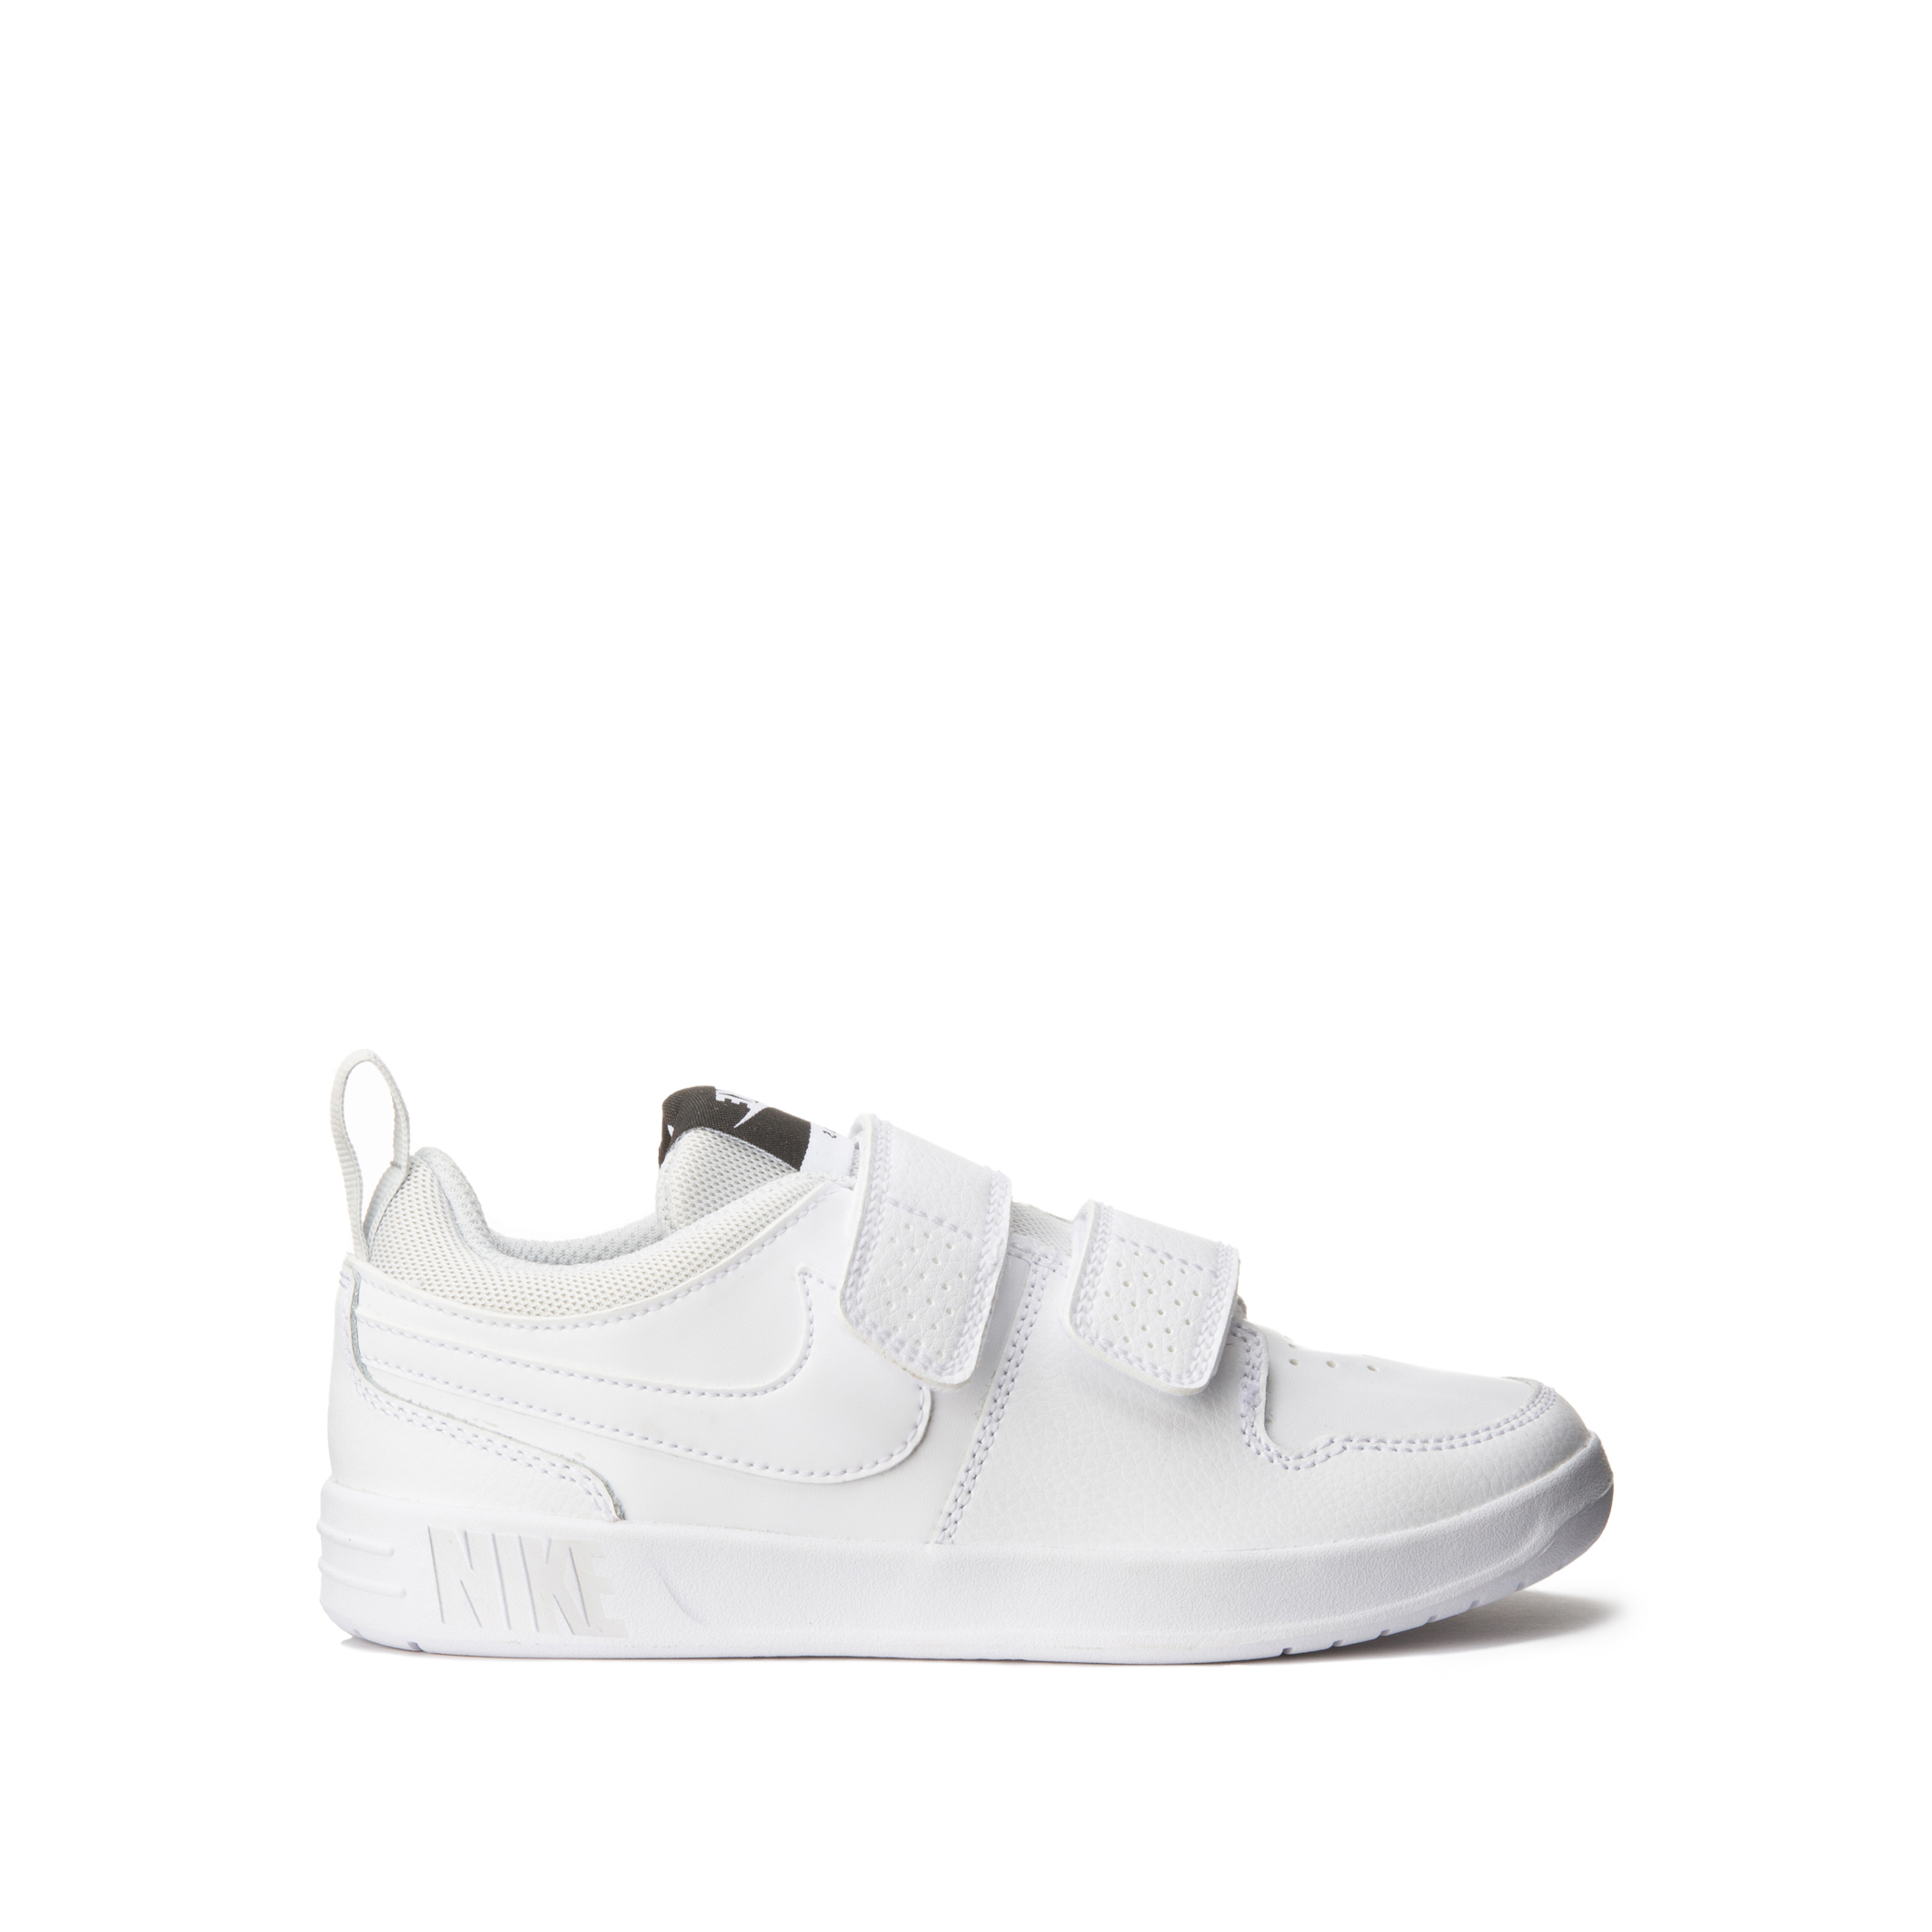 Kids pico touch 'n' close trainers , white, Nike | La Redoute